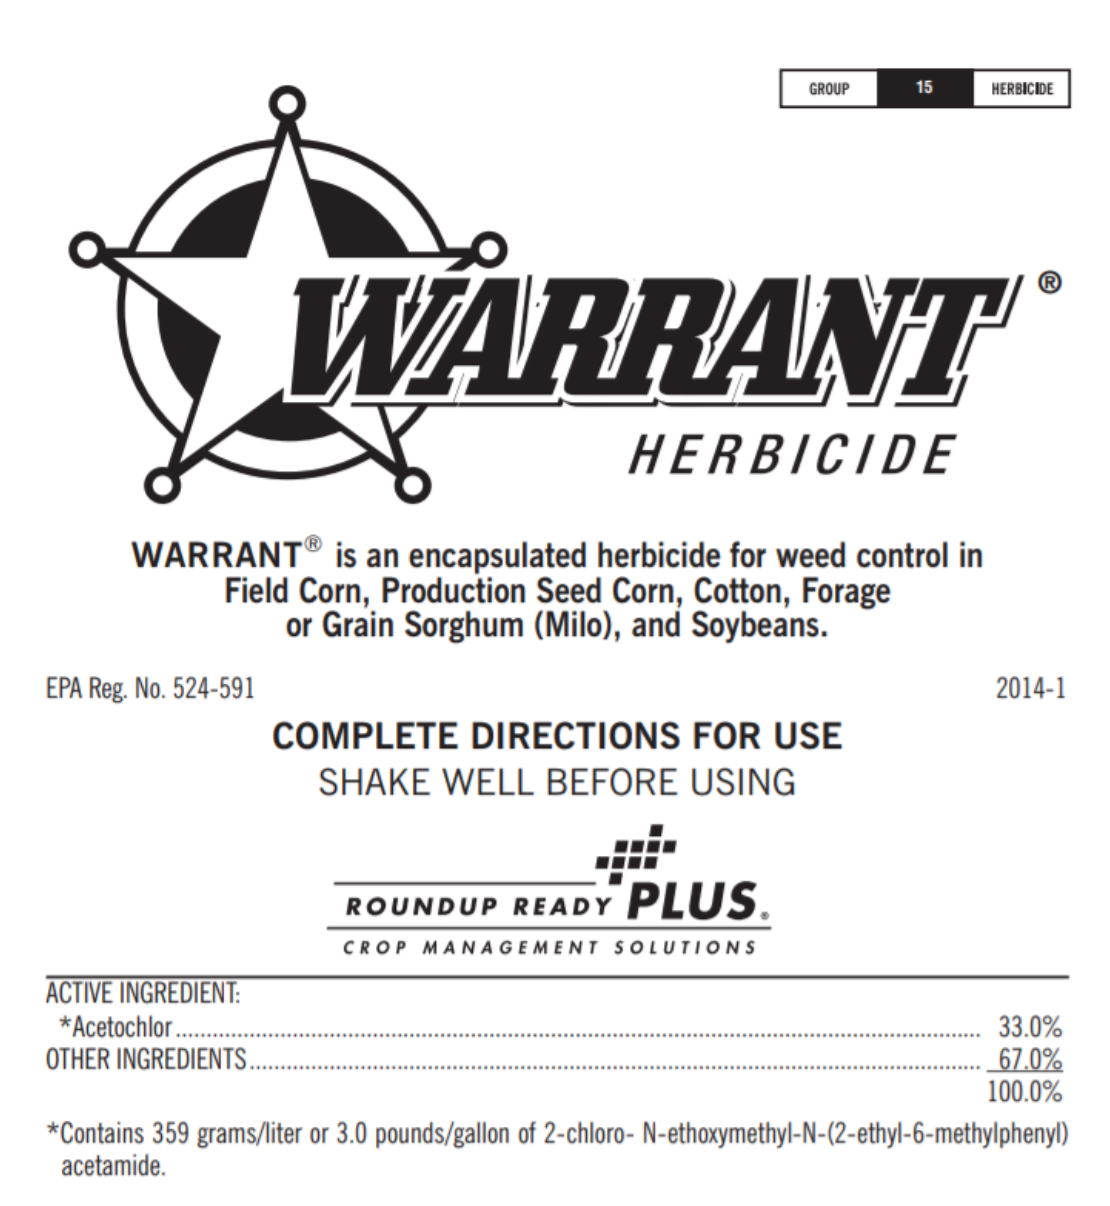 Warrant Herbicide - Warrant is an encapsulated herbicide for weed control in Field Corn, Production Seed Corn, Cotton, Forage or Grain sorghum (Milo), and Soybeans.